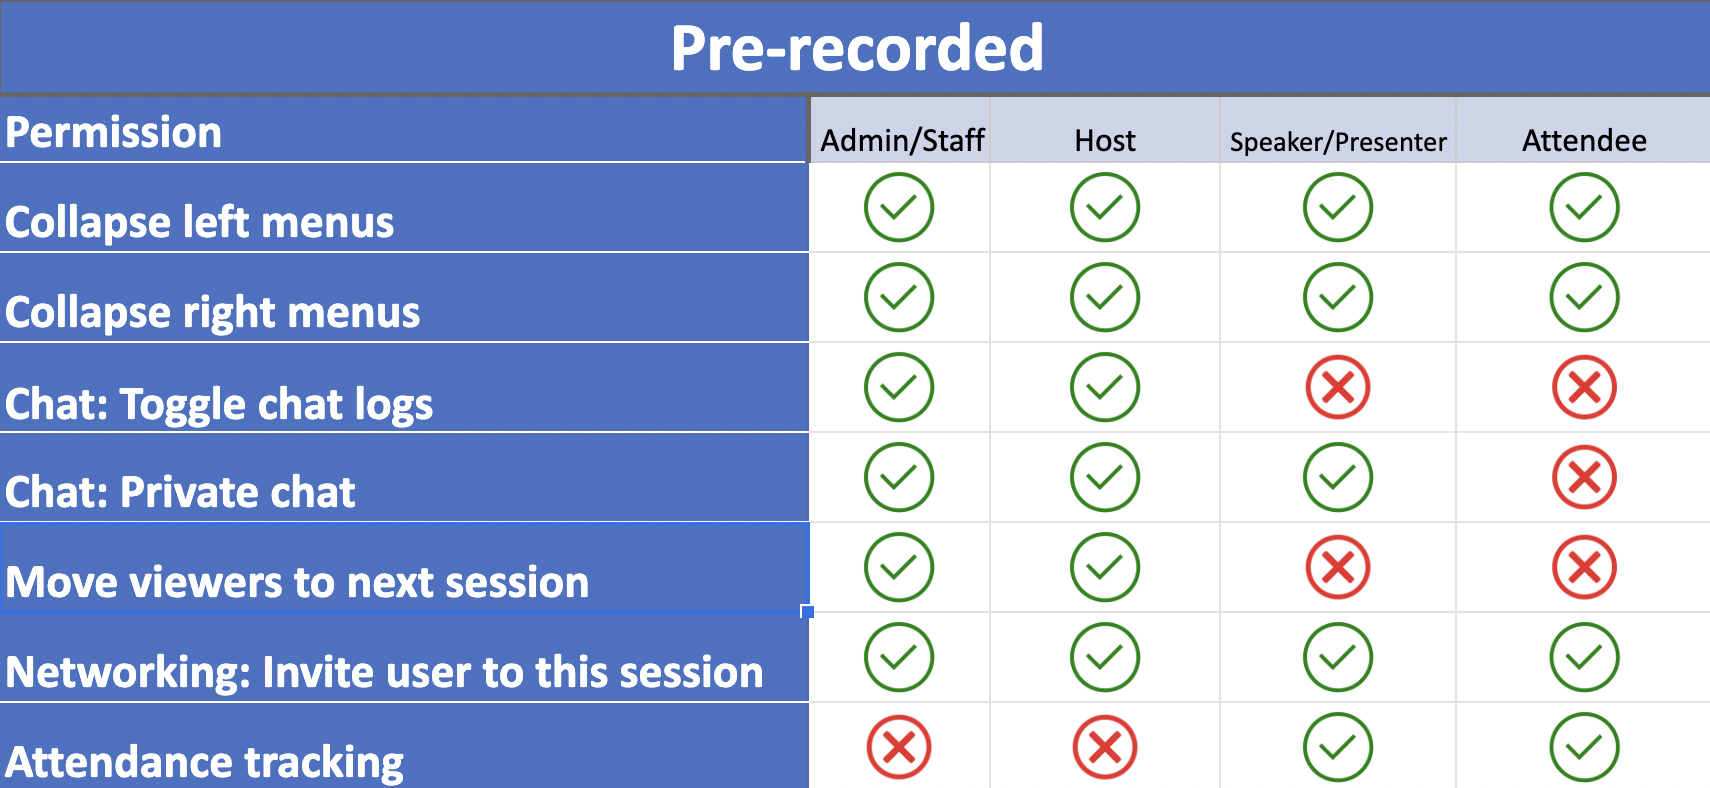 Table showing what each permission level can do in the Pre-recorded room video mode